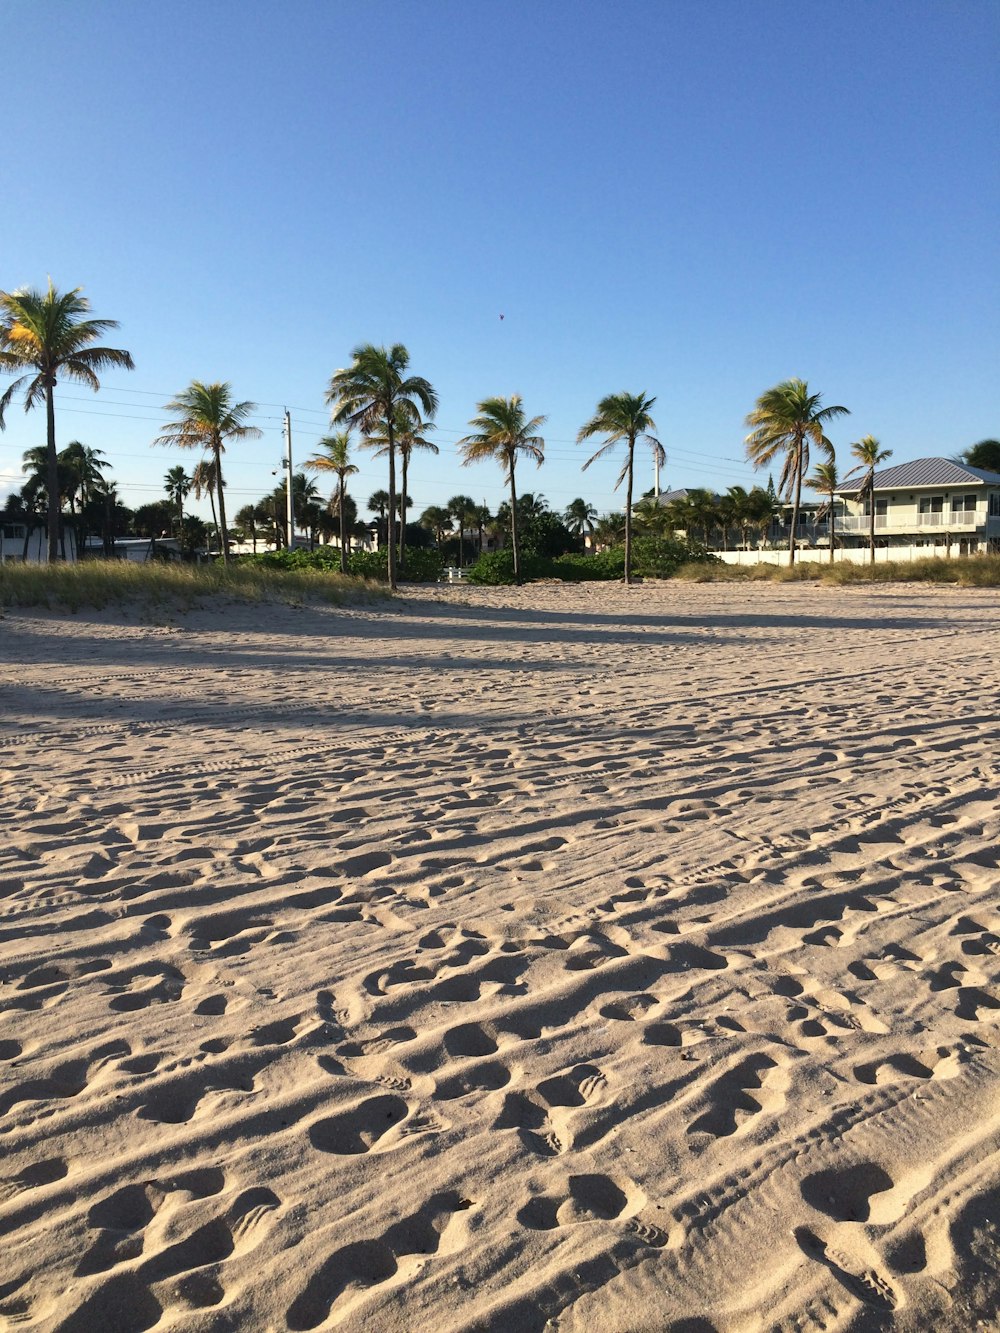 a sandy beach with palm trees in the background